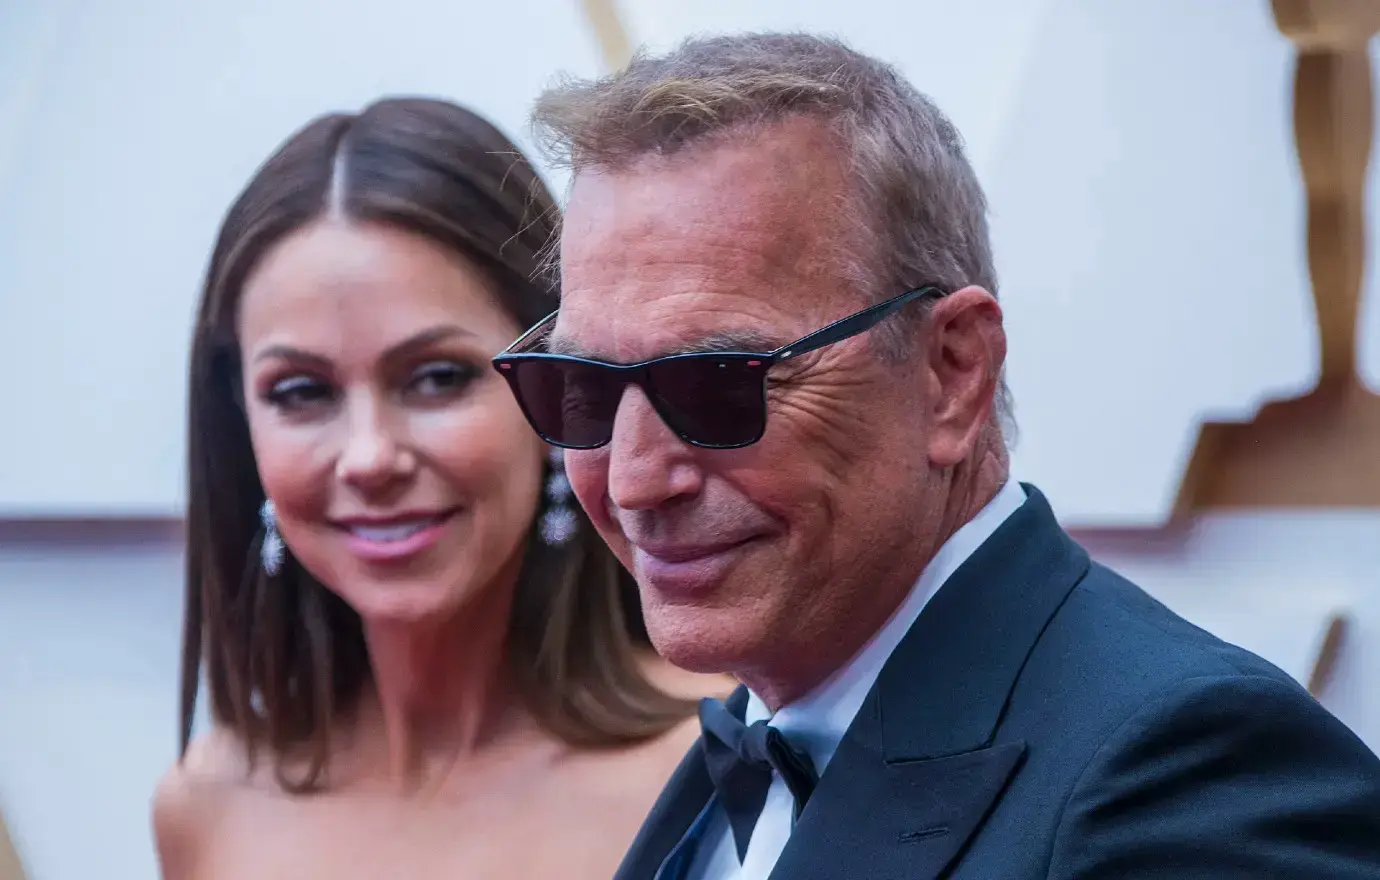 Kevin Costner Convinced His Ex-Wife Is Trying to Make Him Look Bad picture